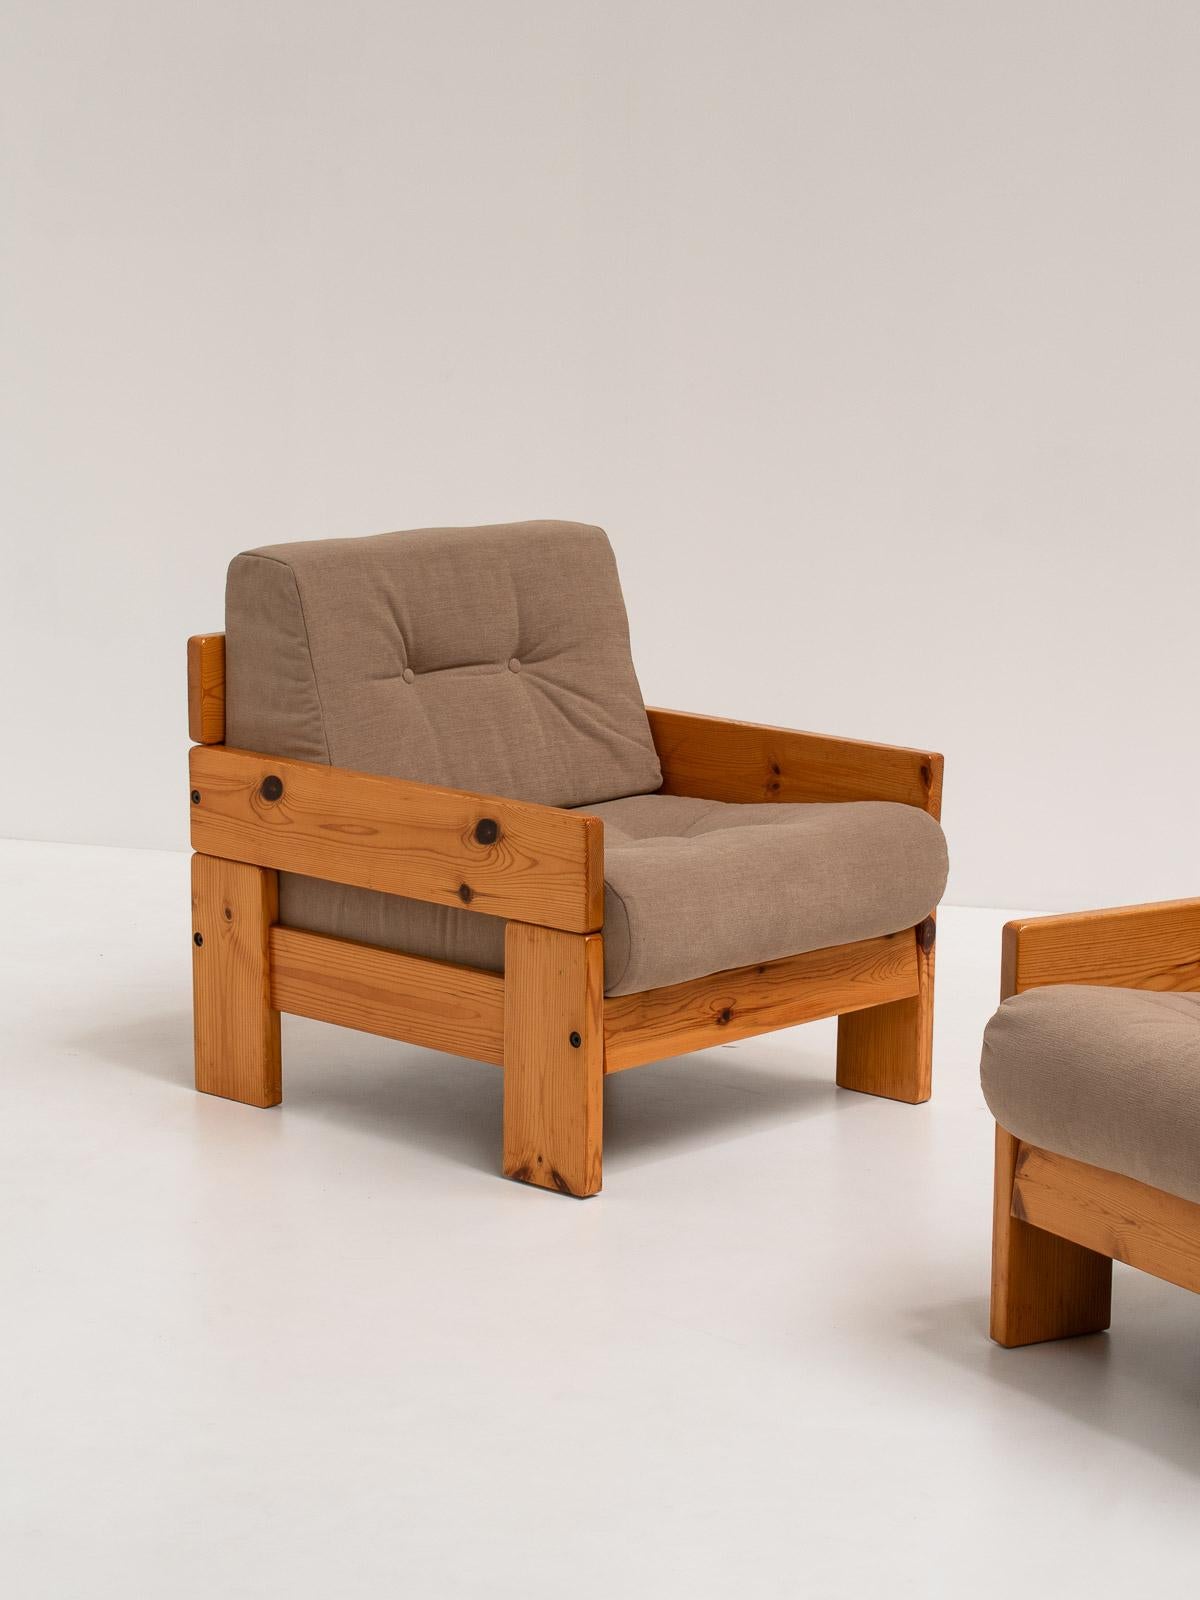 Italian Pair of Minimalist Pine Lounge Chairs, Italy, 1970s For Sale